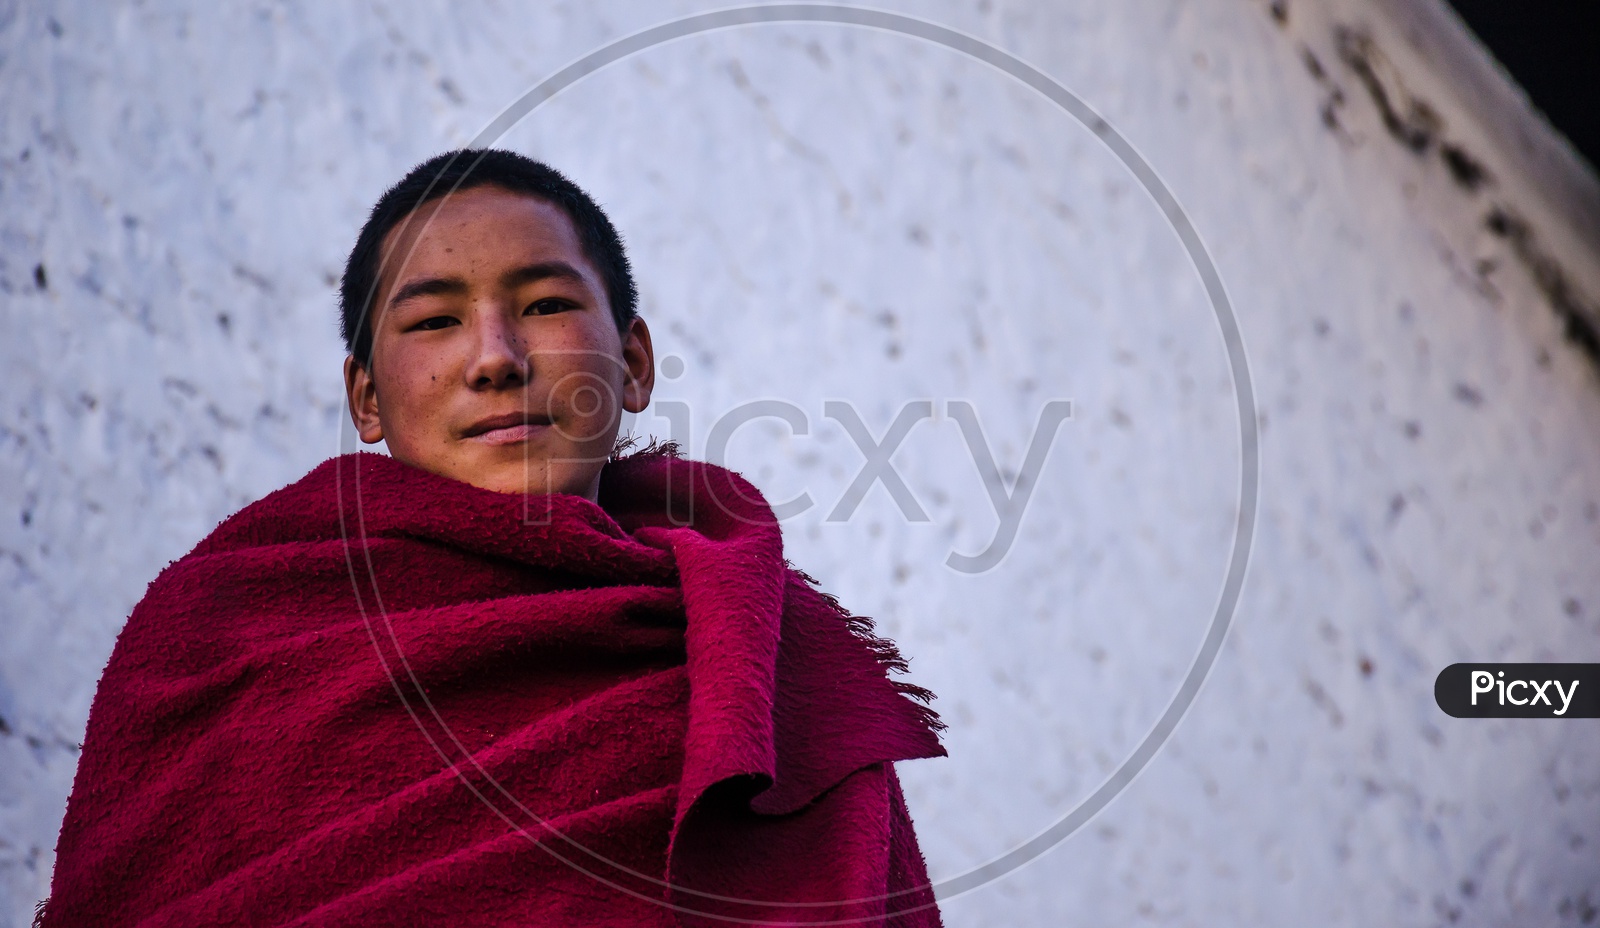 The Young monk in Tawang